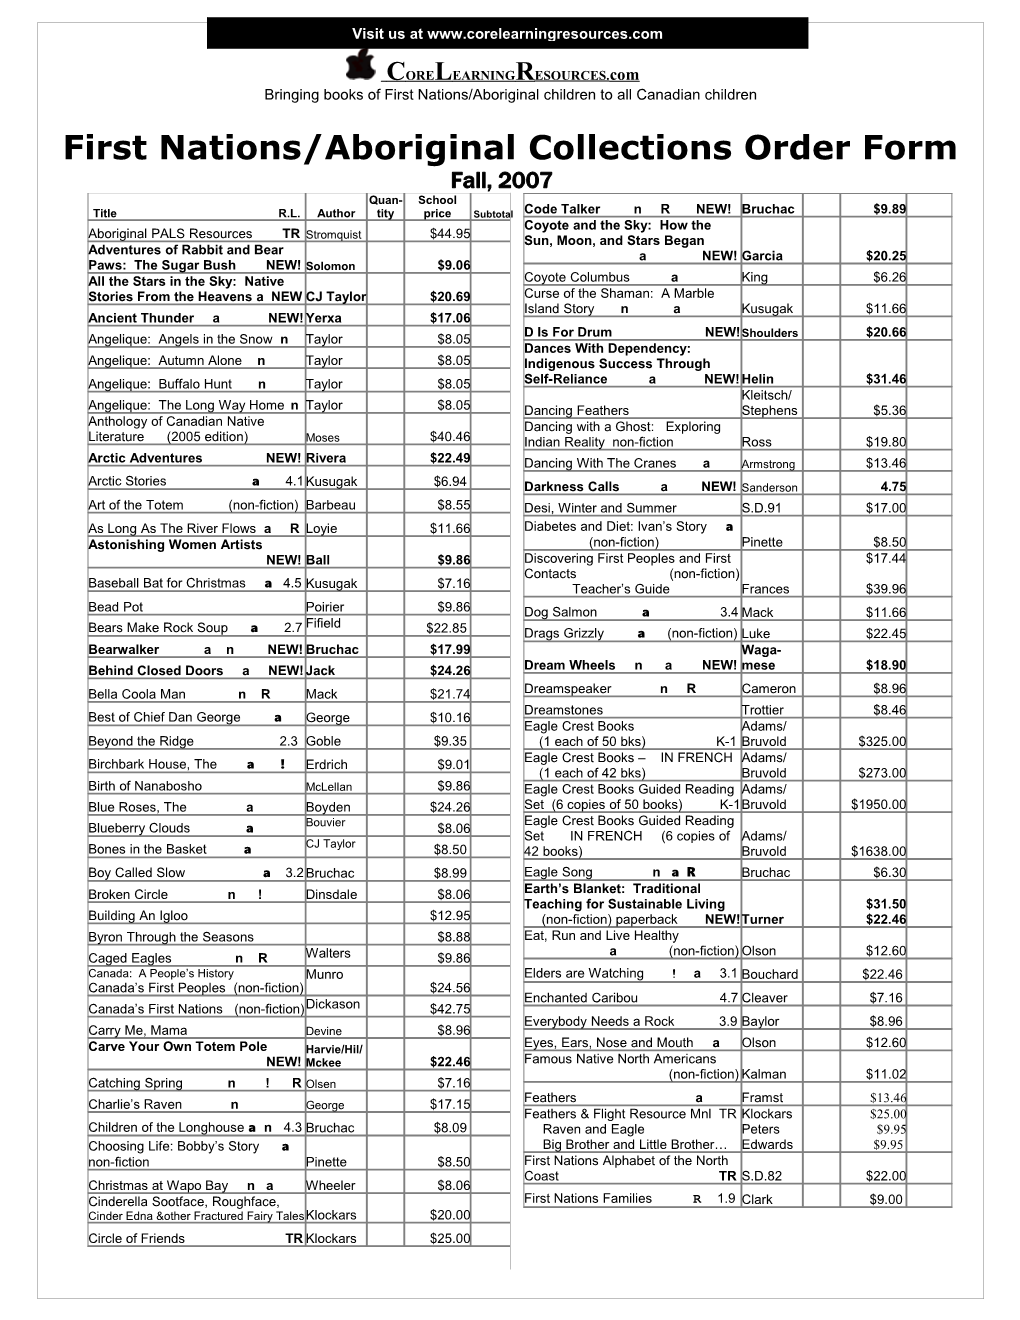 First Nations Collections Order Form